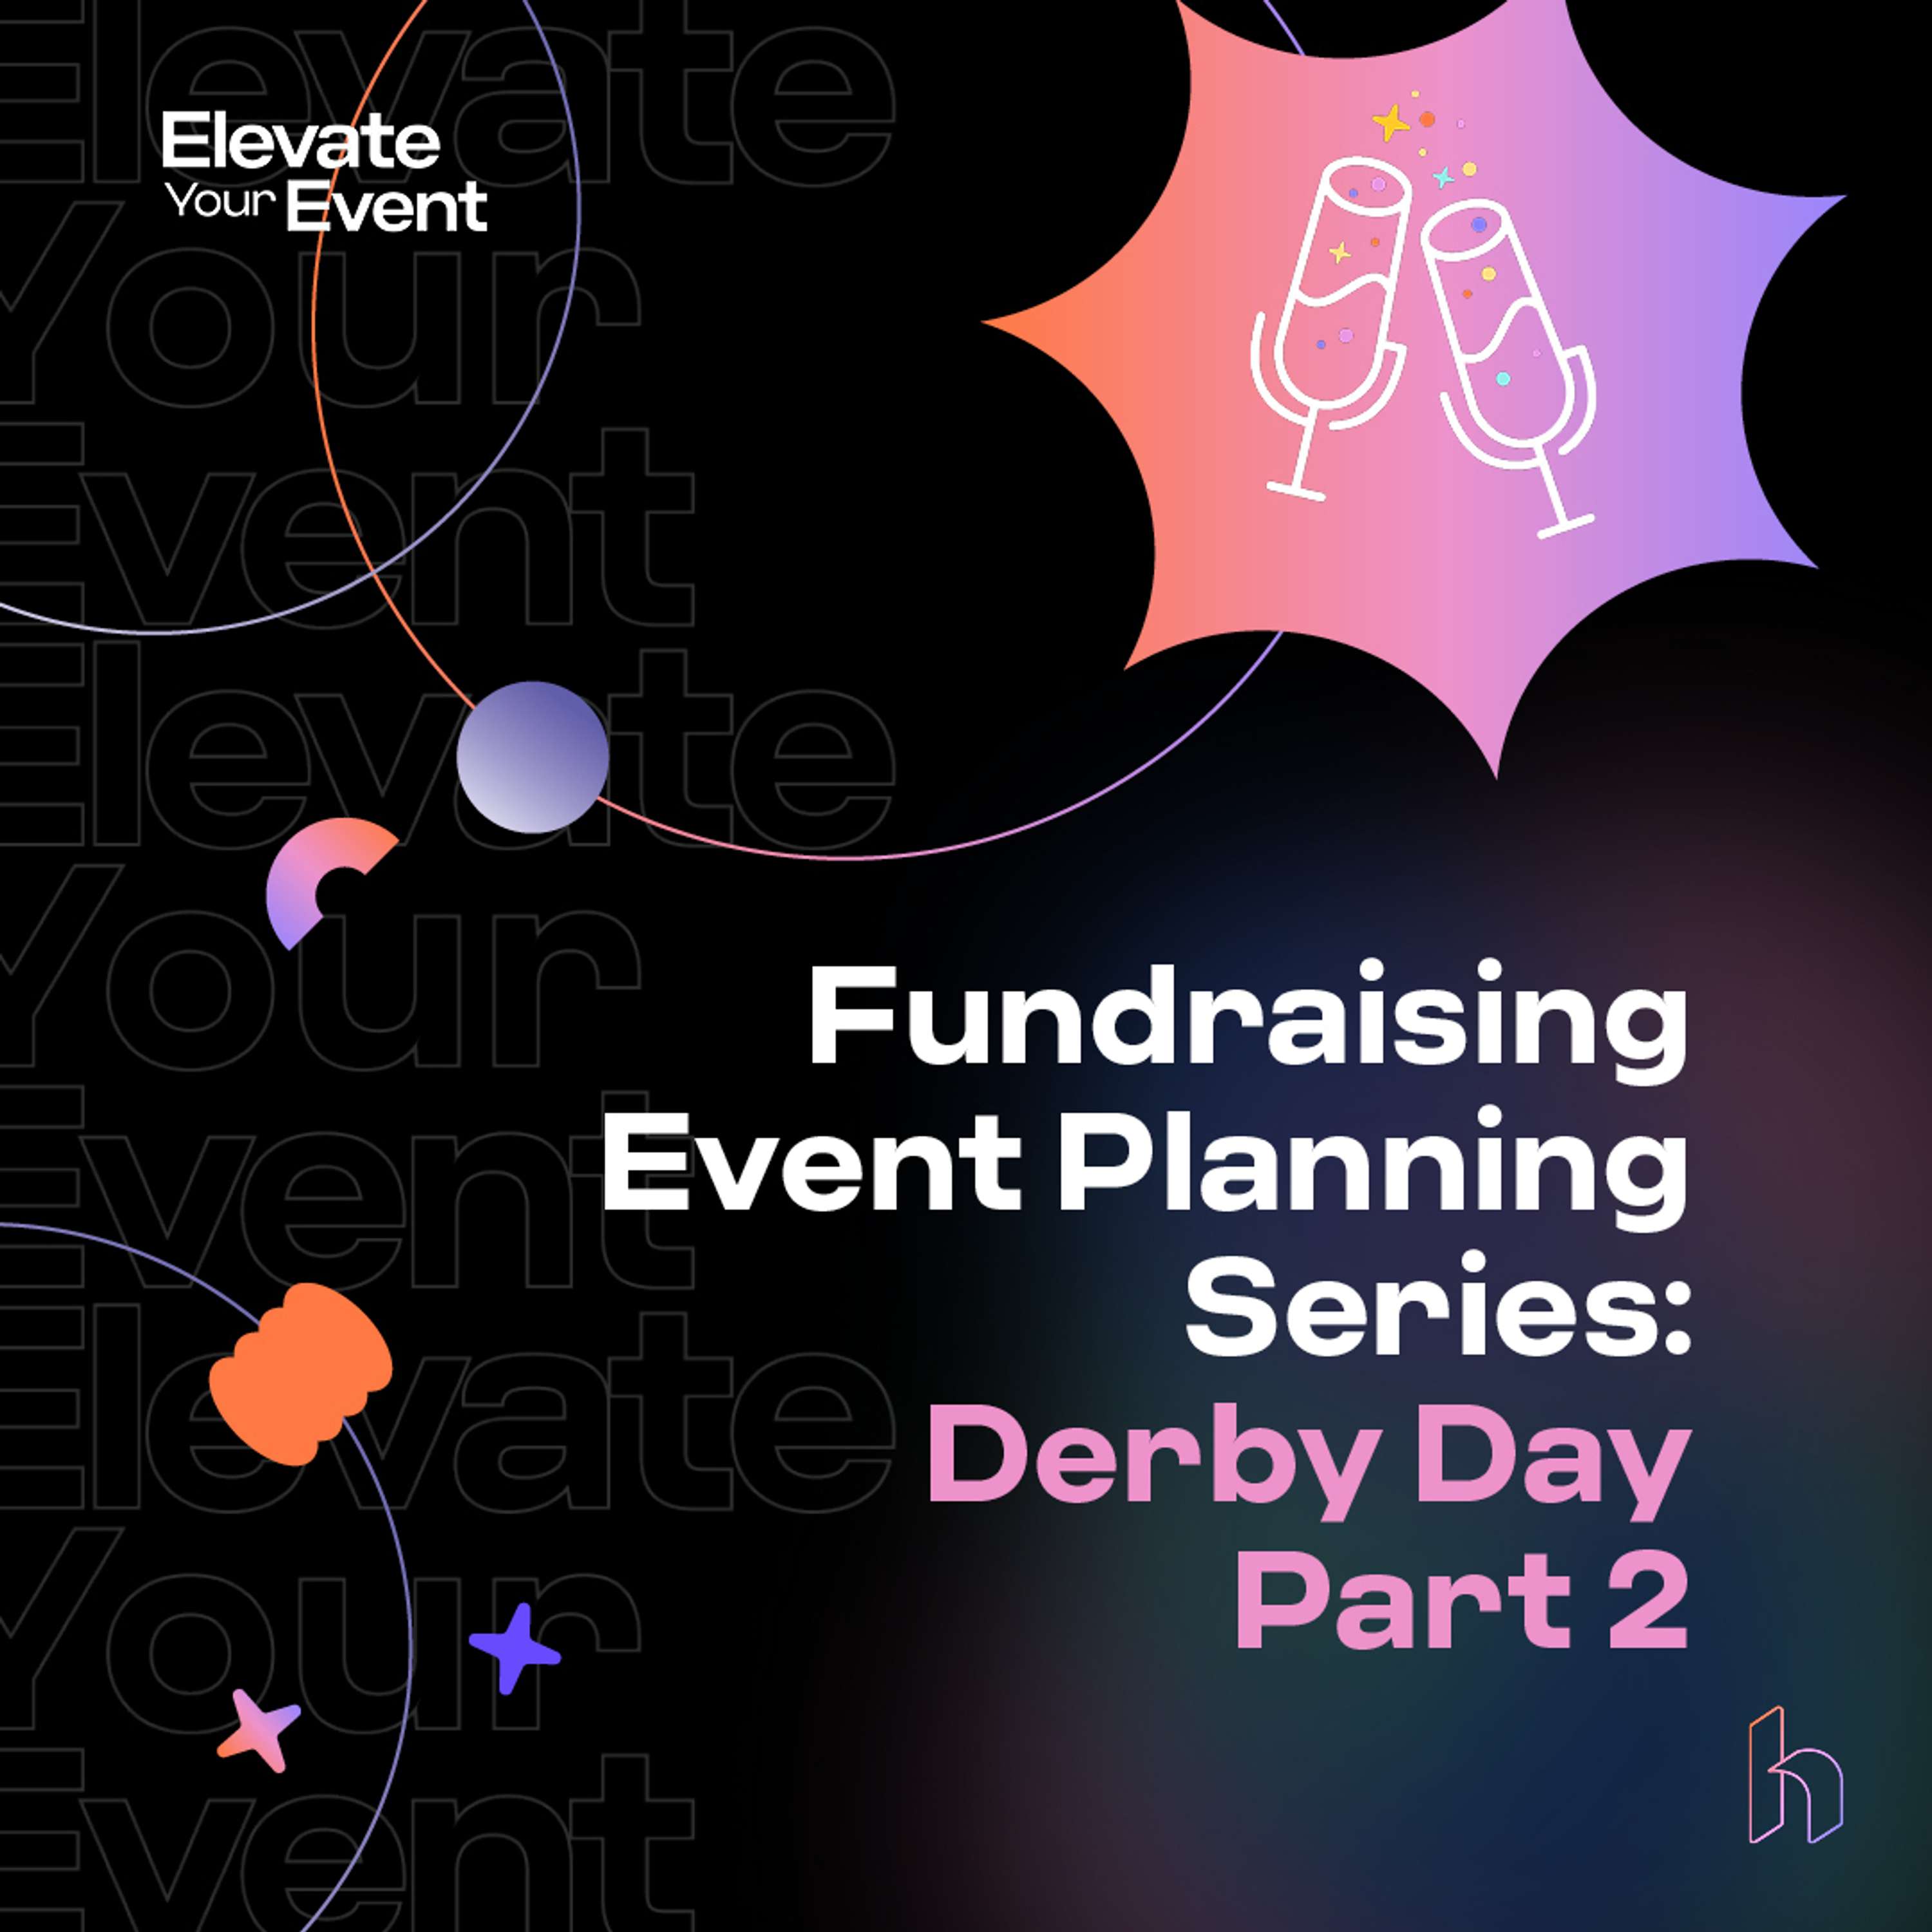 Fundraising Event Planning Series: Derby Day Part 2